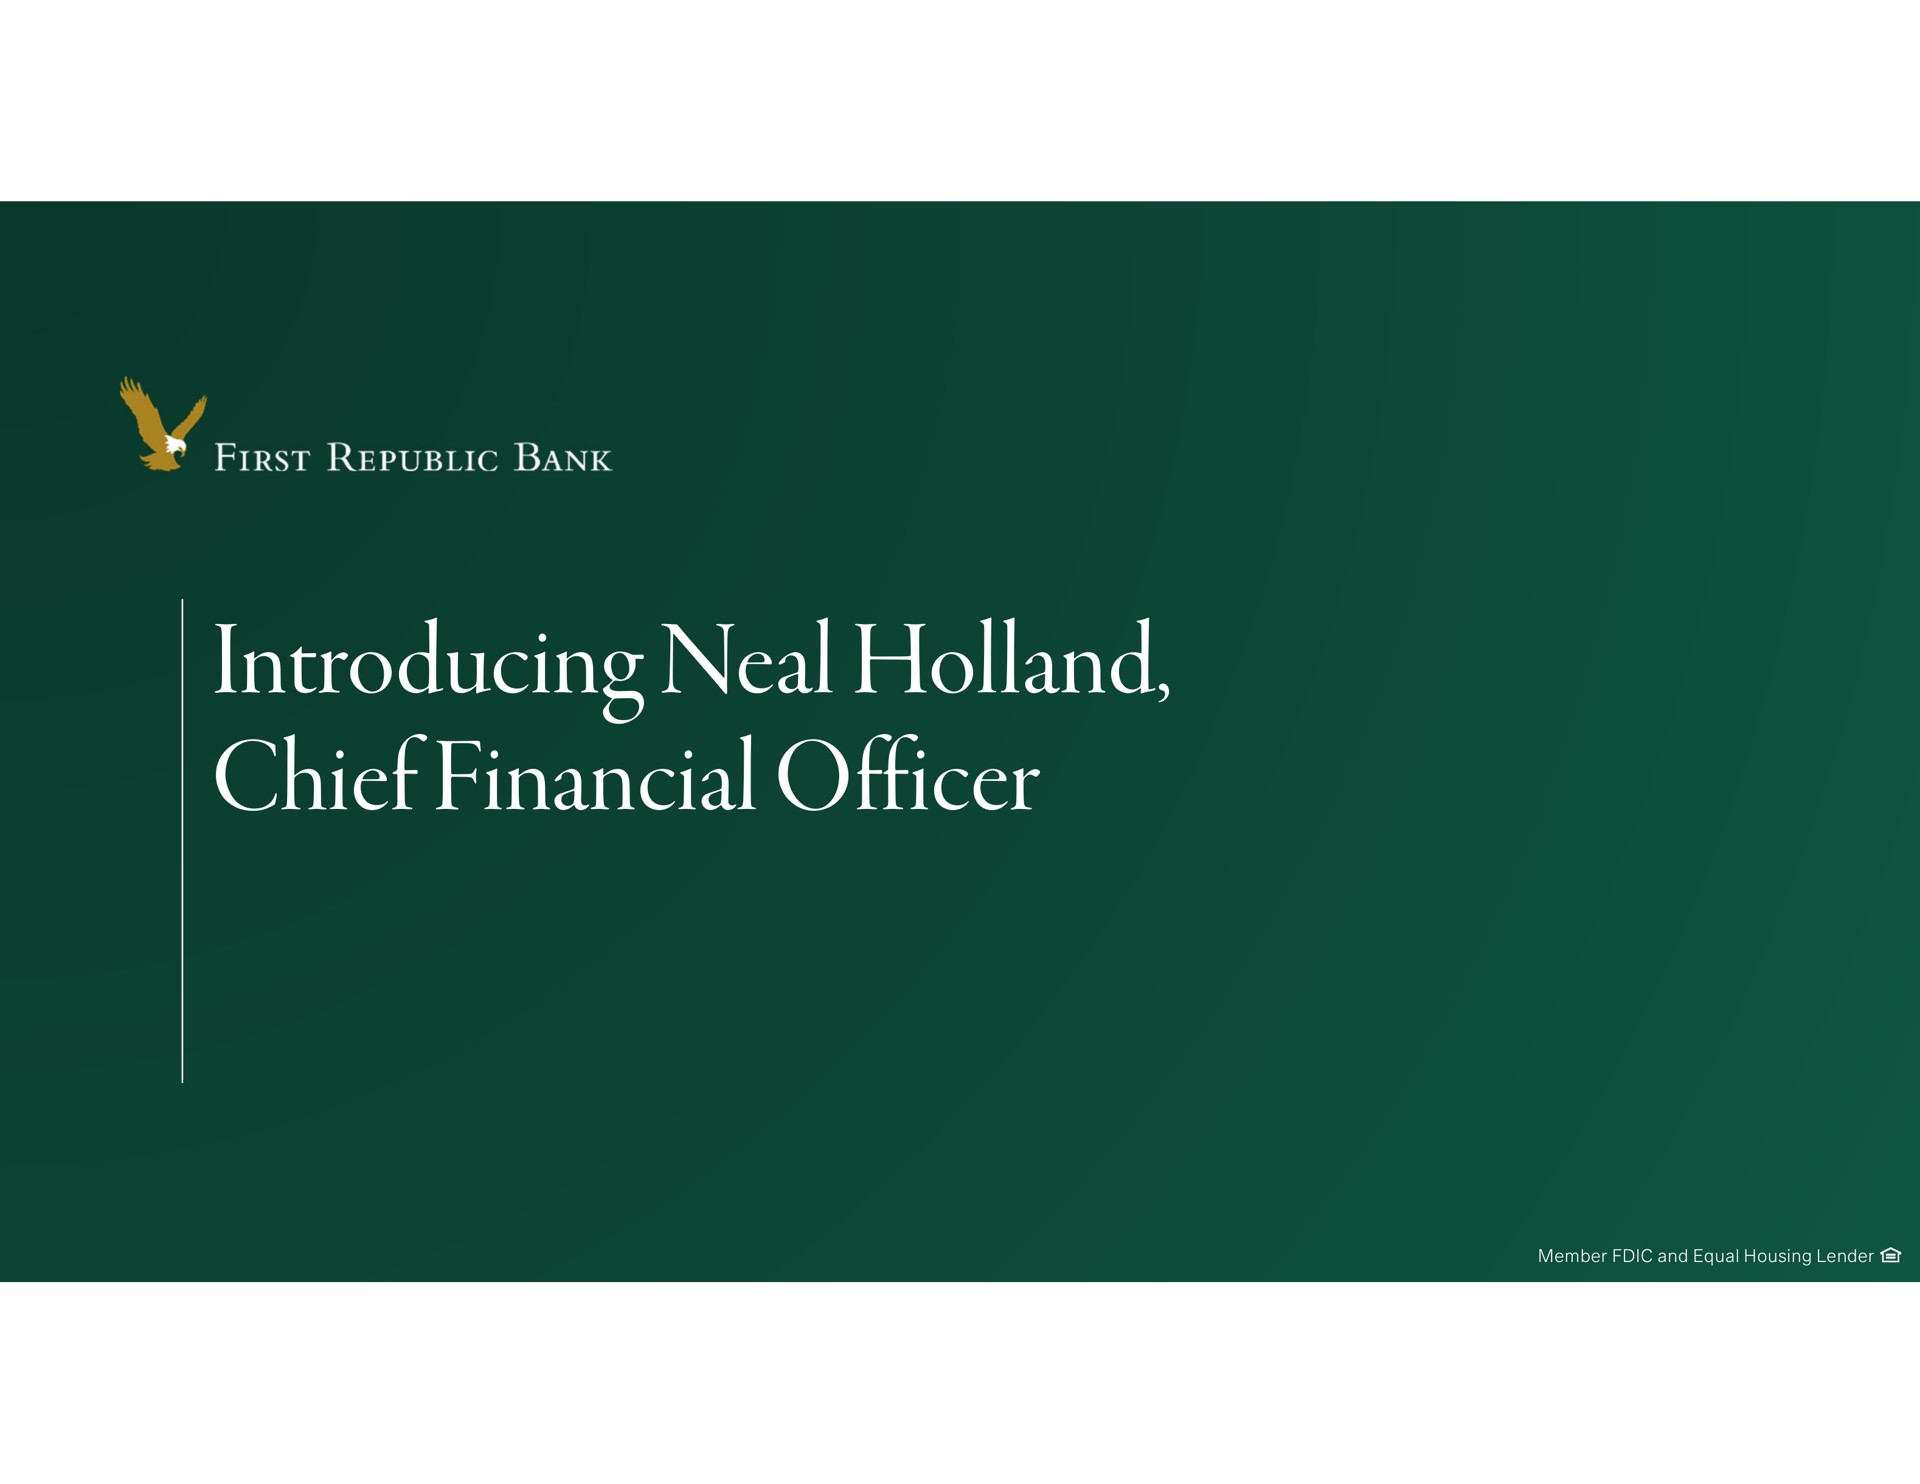 introducing neal chief financial officer | First Republic Bank